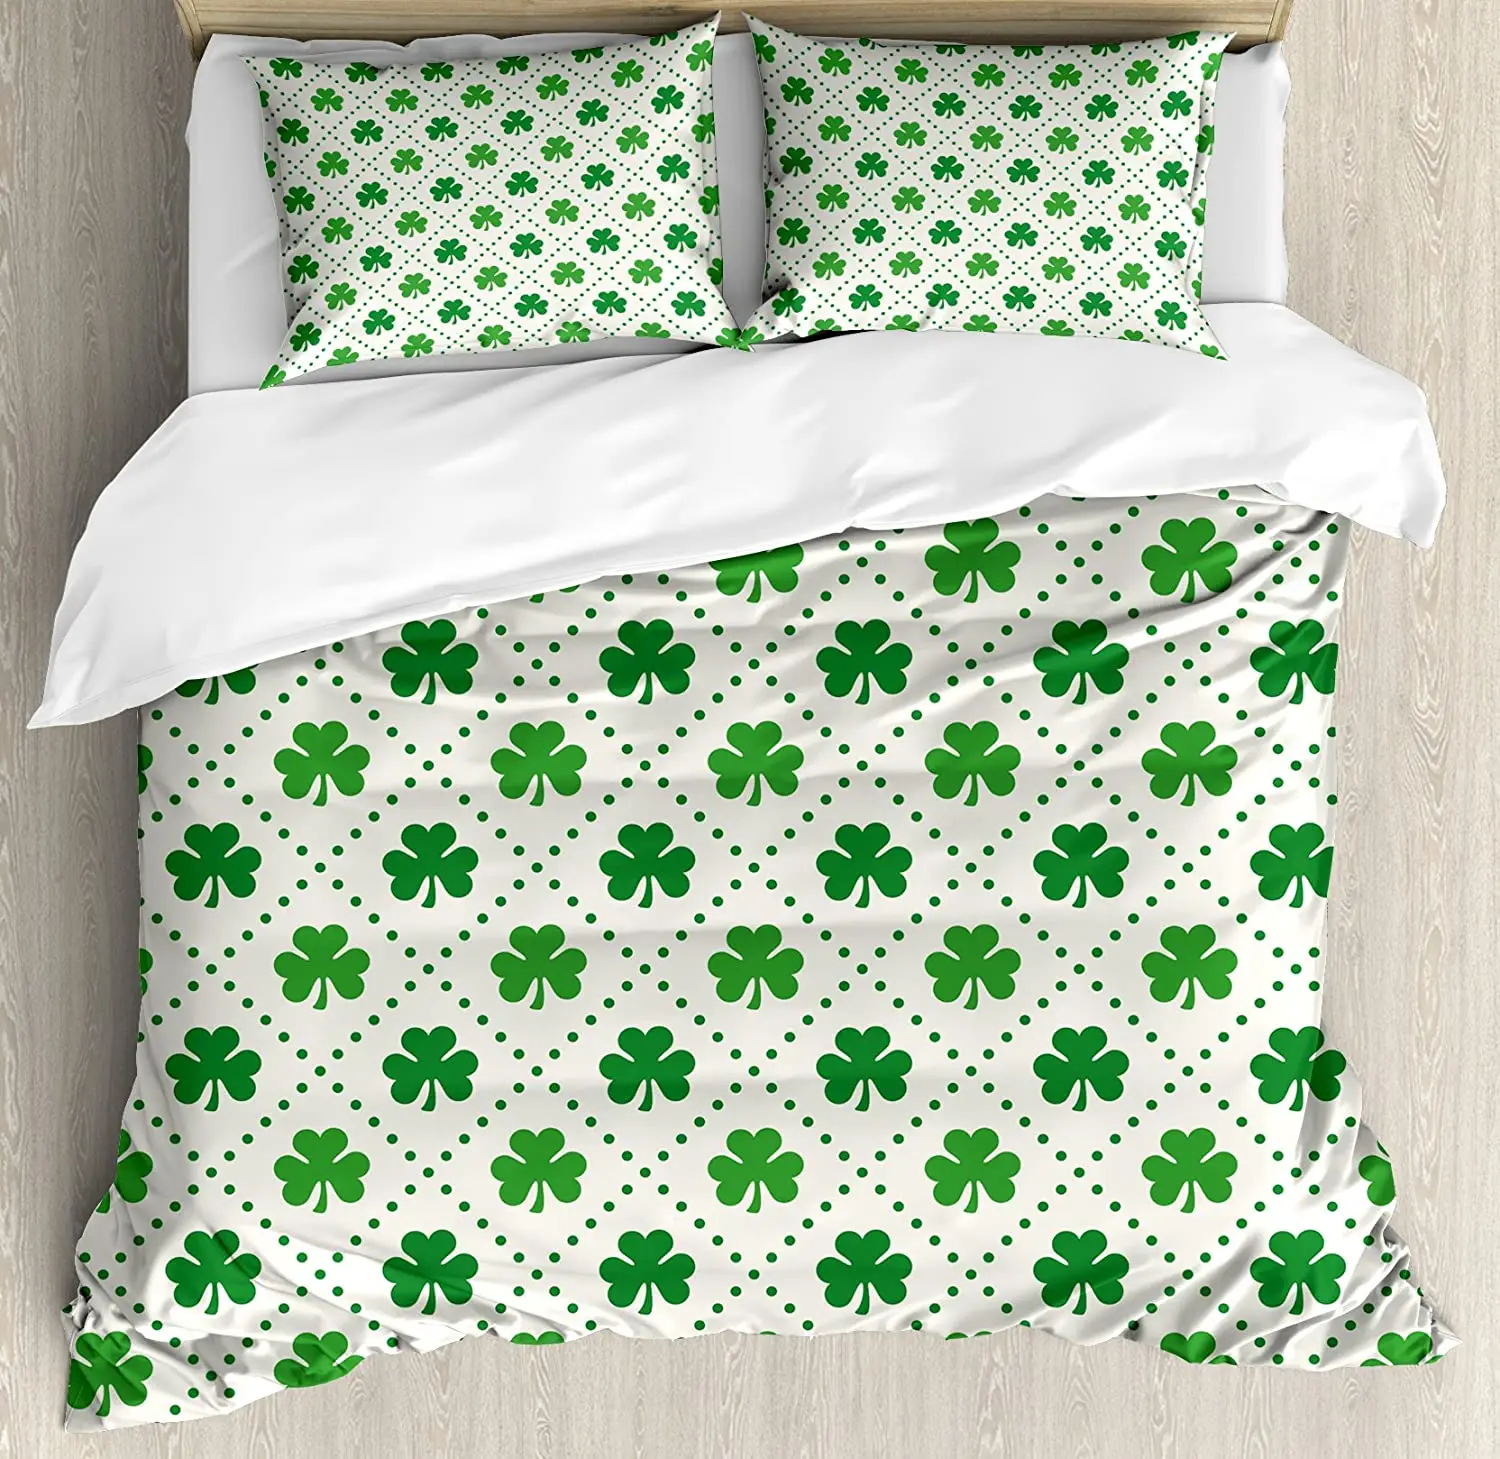 

Irish Bedding Set For Bedroom Bed Home Four Leaf Shamrock Clover Flowers with Dotted Dash Duvet Cover Quilt Cover And Pillowcase